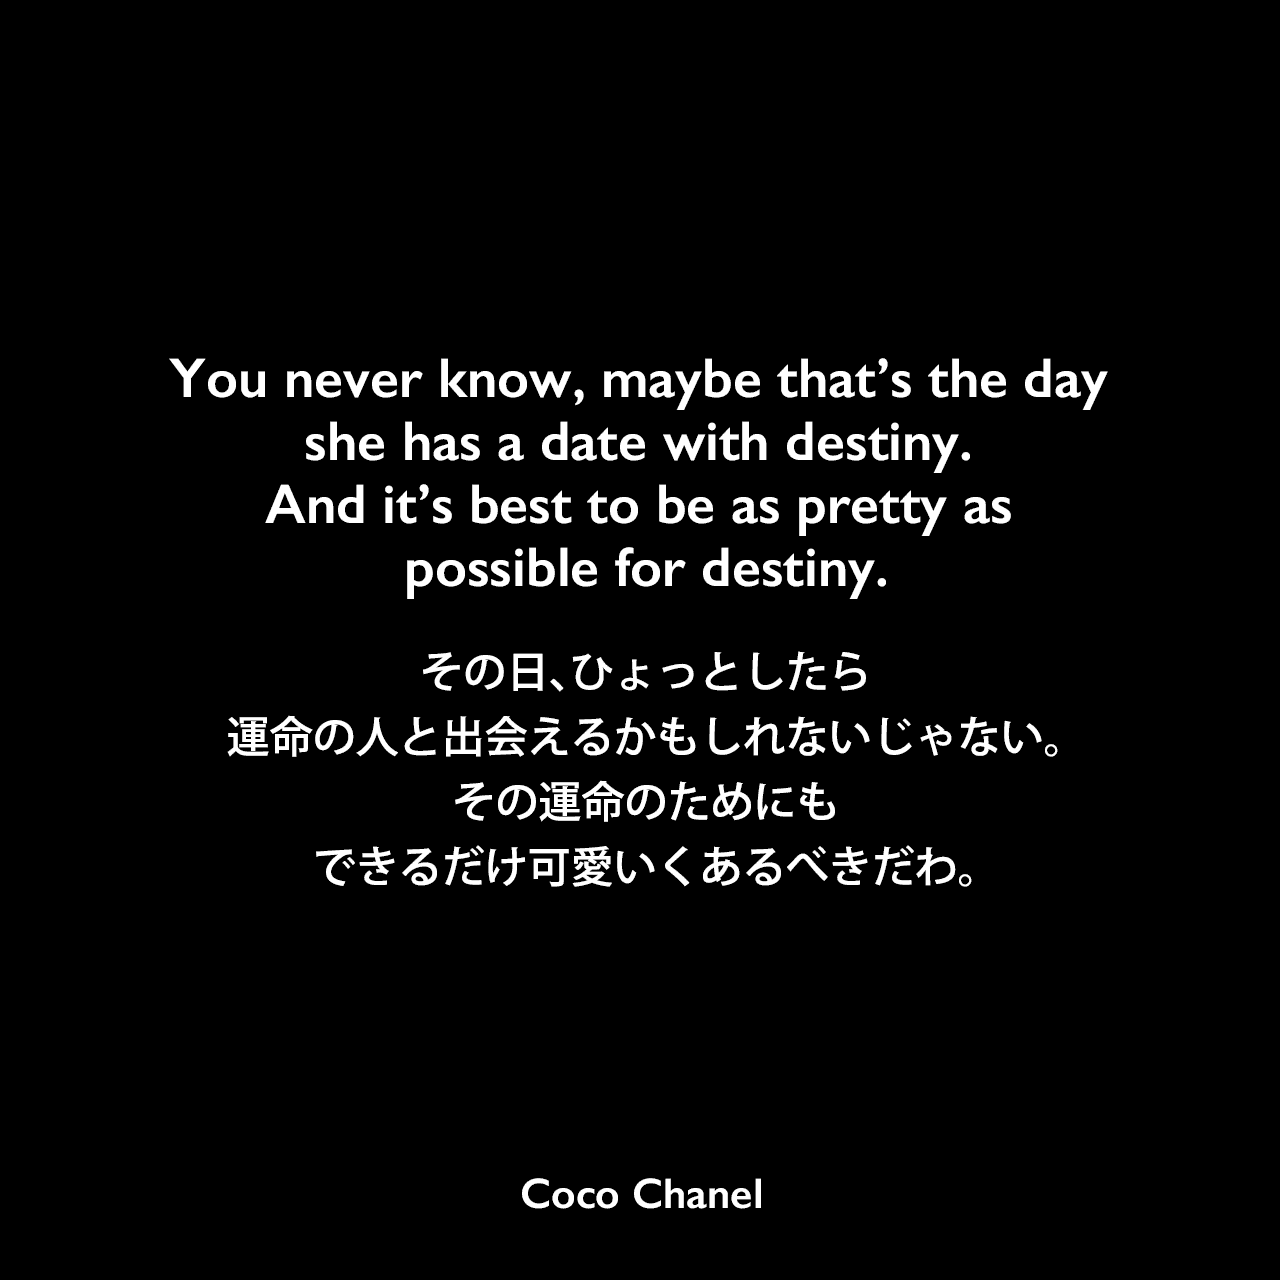 You never know, maybe that’s the day she has a date with destiny. And it’s best to be as pretty as possible for destiny.その日、ひょっとしたら、運命の人と出会えるかもしれないじゃない。その運命のためにも、できるだけかわいくあるべきだわ。Coco Chanel